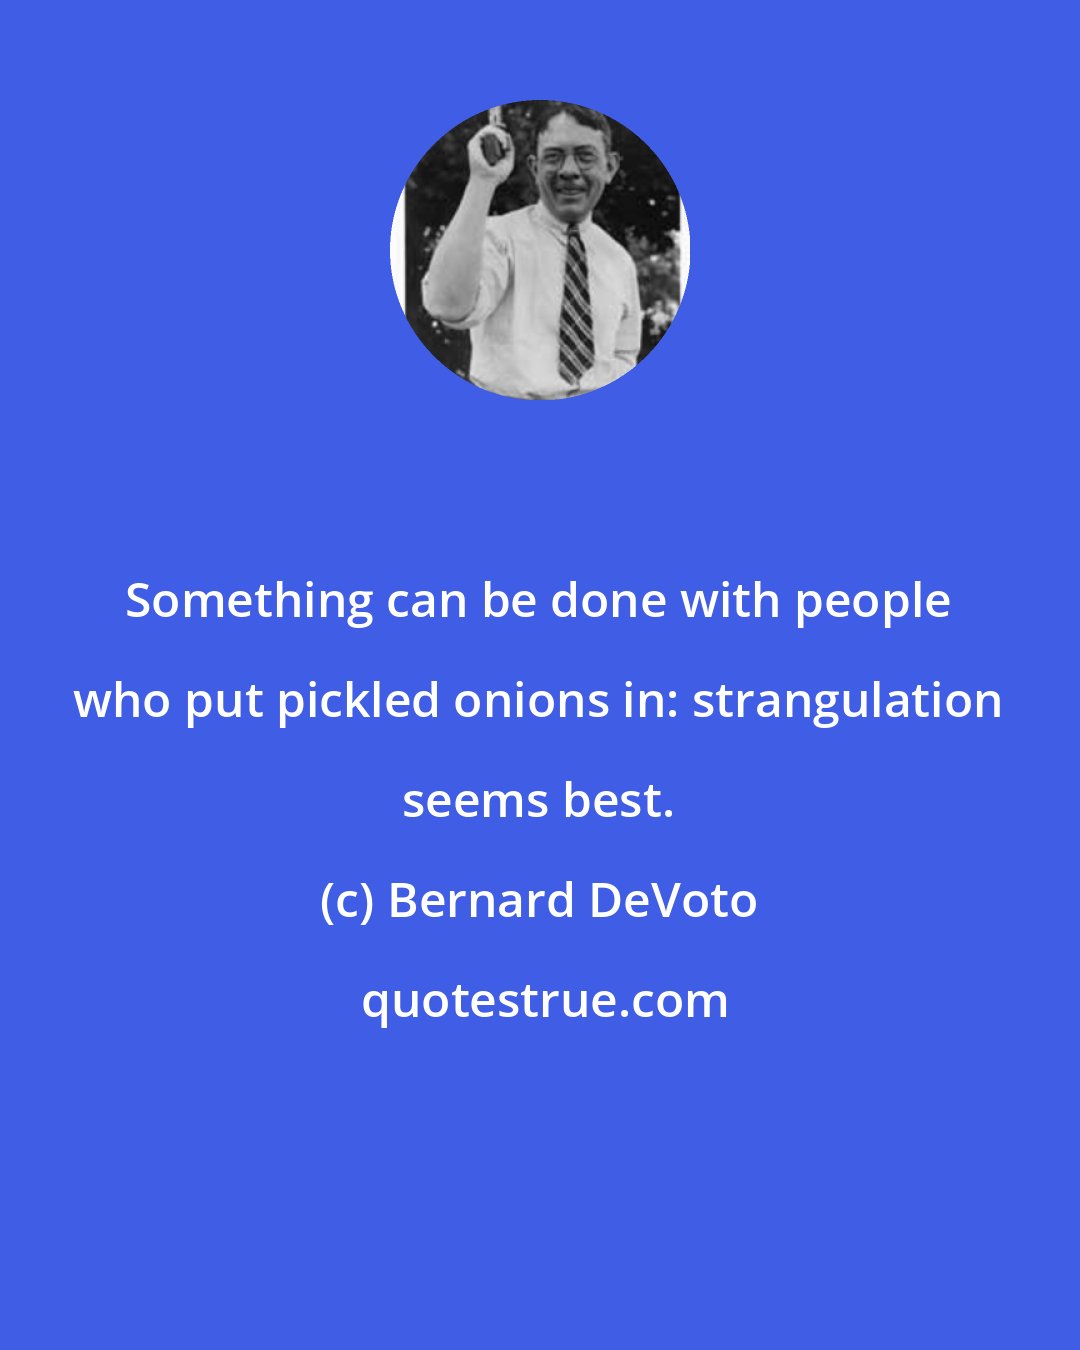 Bernard DeVoto: Something can be done with people who put pickled onions in: strangulation seems best.